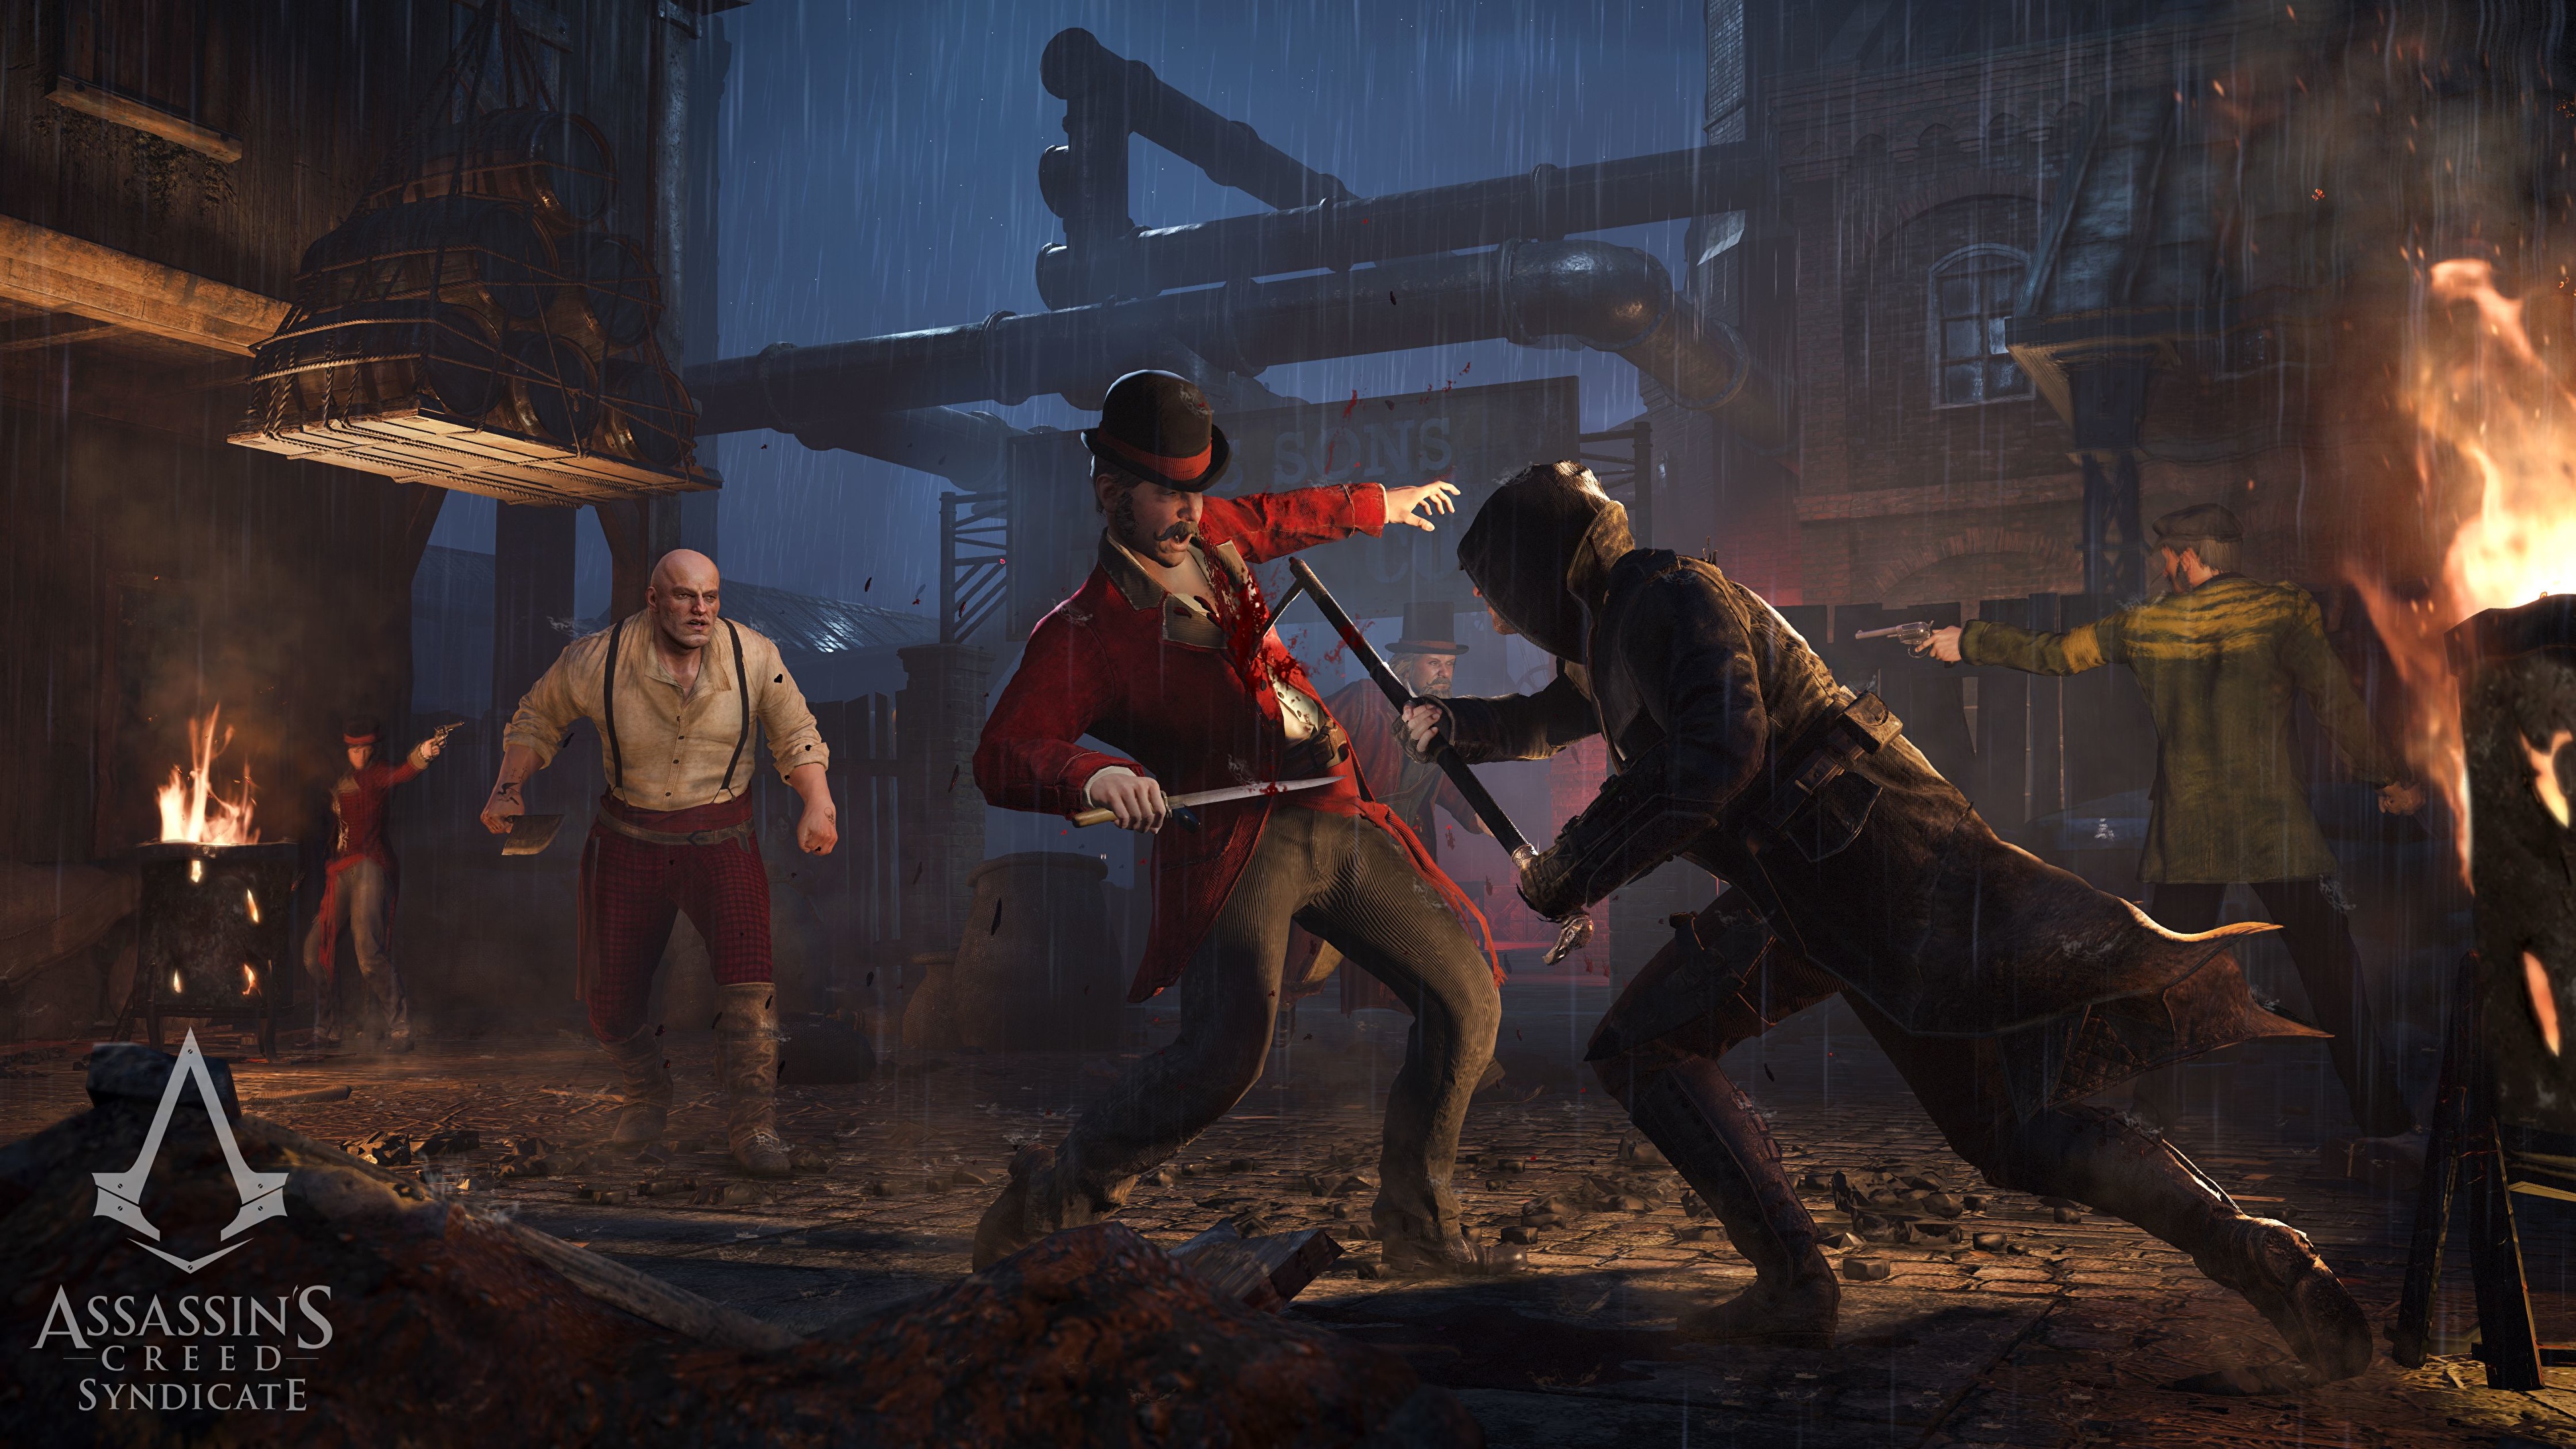 Assassin's Creed Assassin's Creed Syndicate - HD Wallpaper 